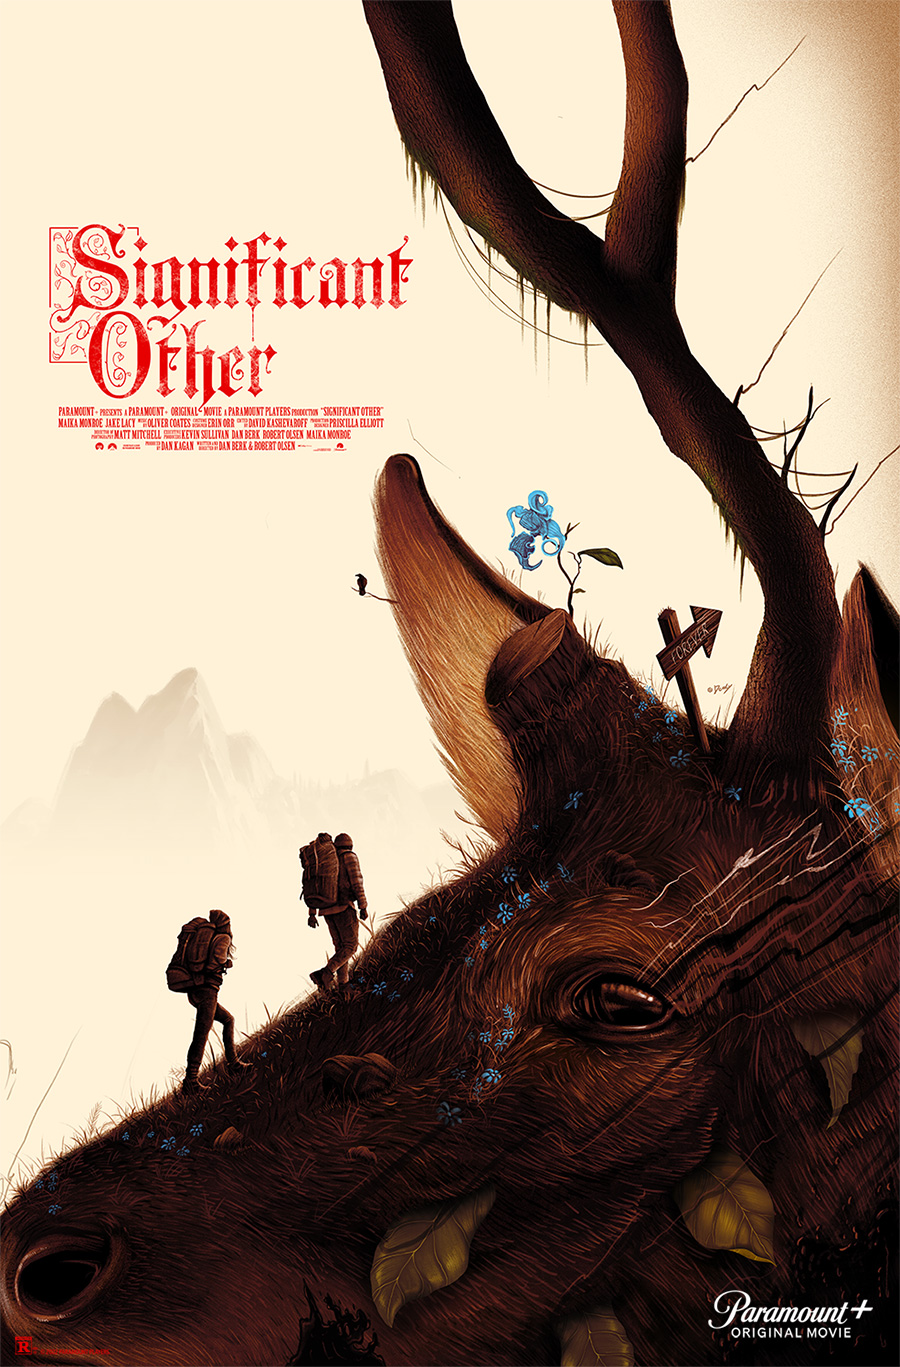 Significant-other-poster-art-doaly